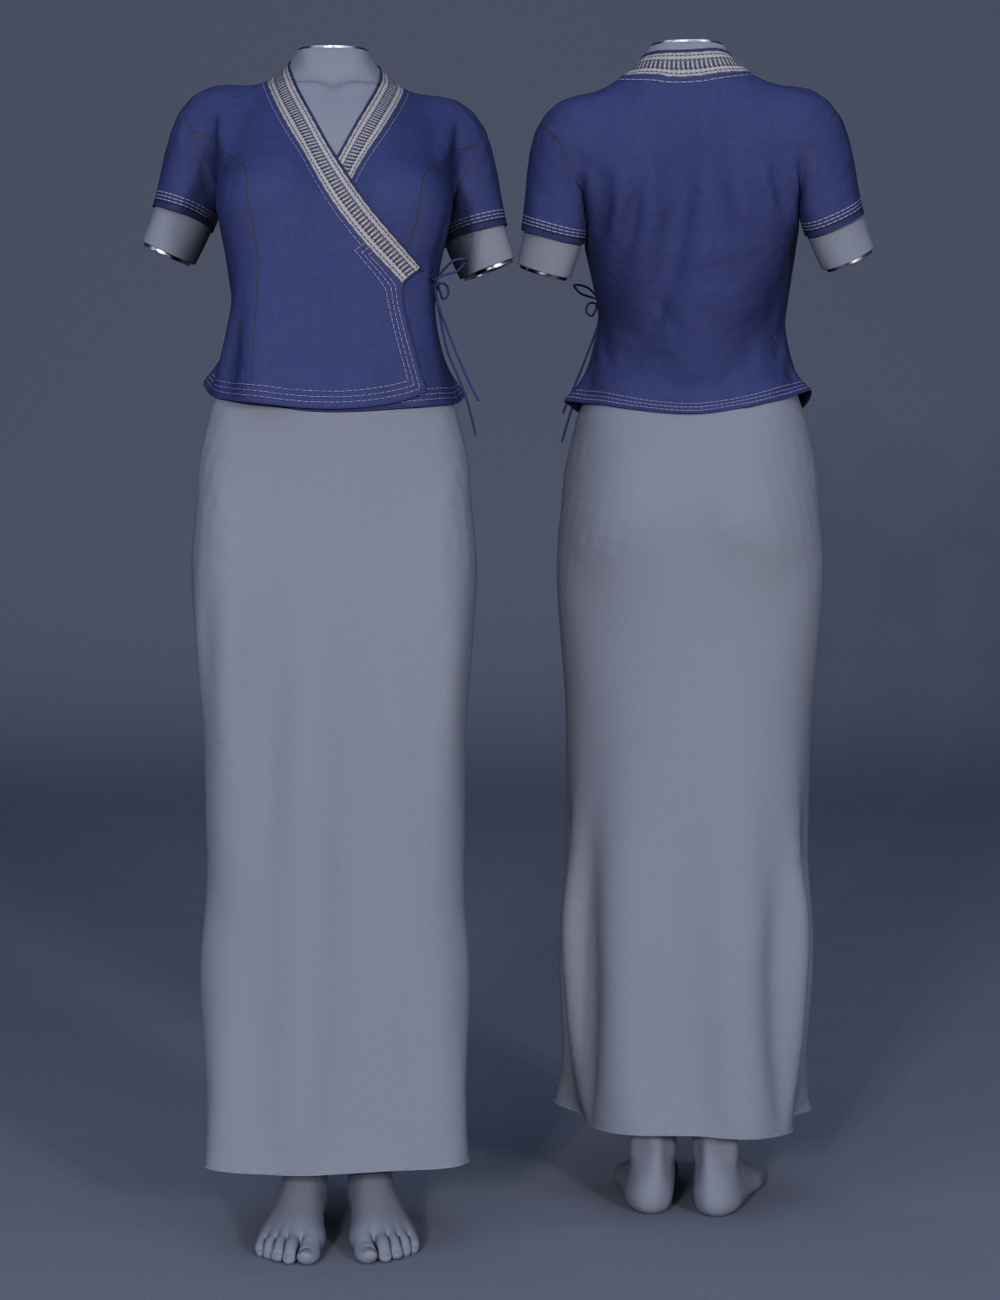 MK Dai dForce Shirts for Genesis 8 and 8.1 Females by: wsmonkeyking, 3D Models by Daz 3D